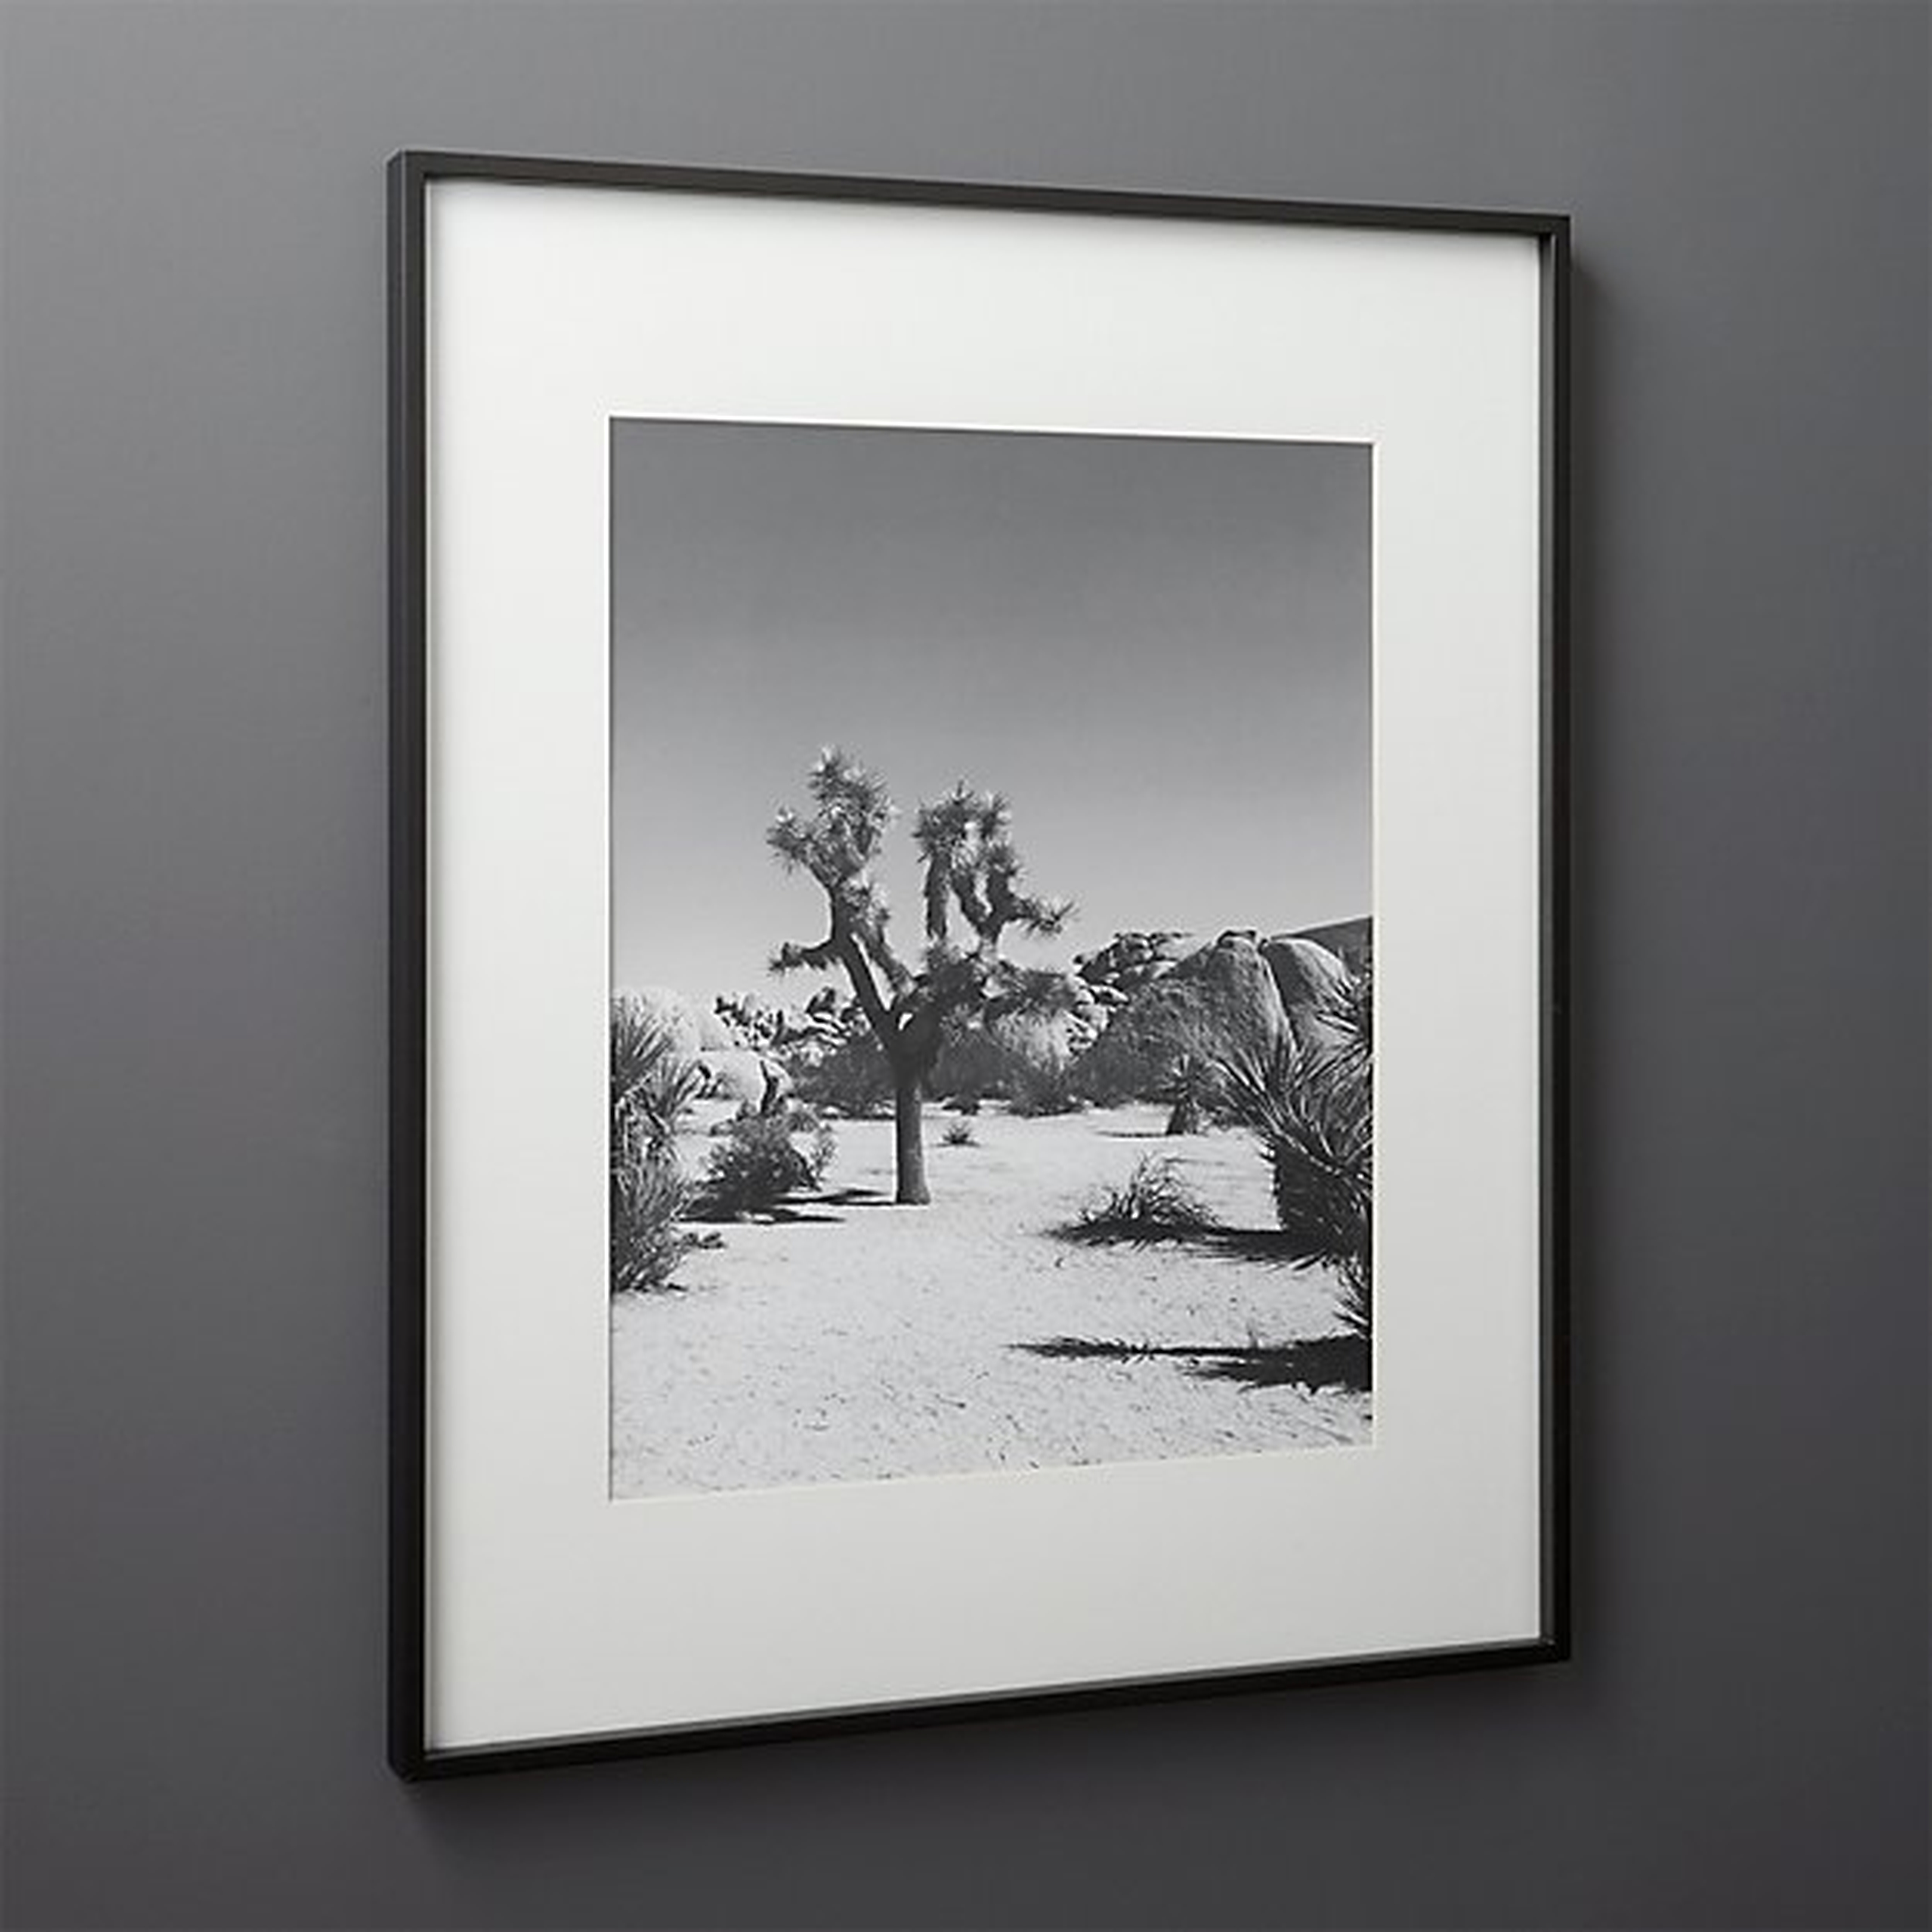 Gallery Black Frame with White Mat 16 x 20 - CB2